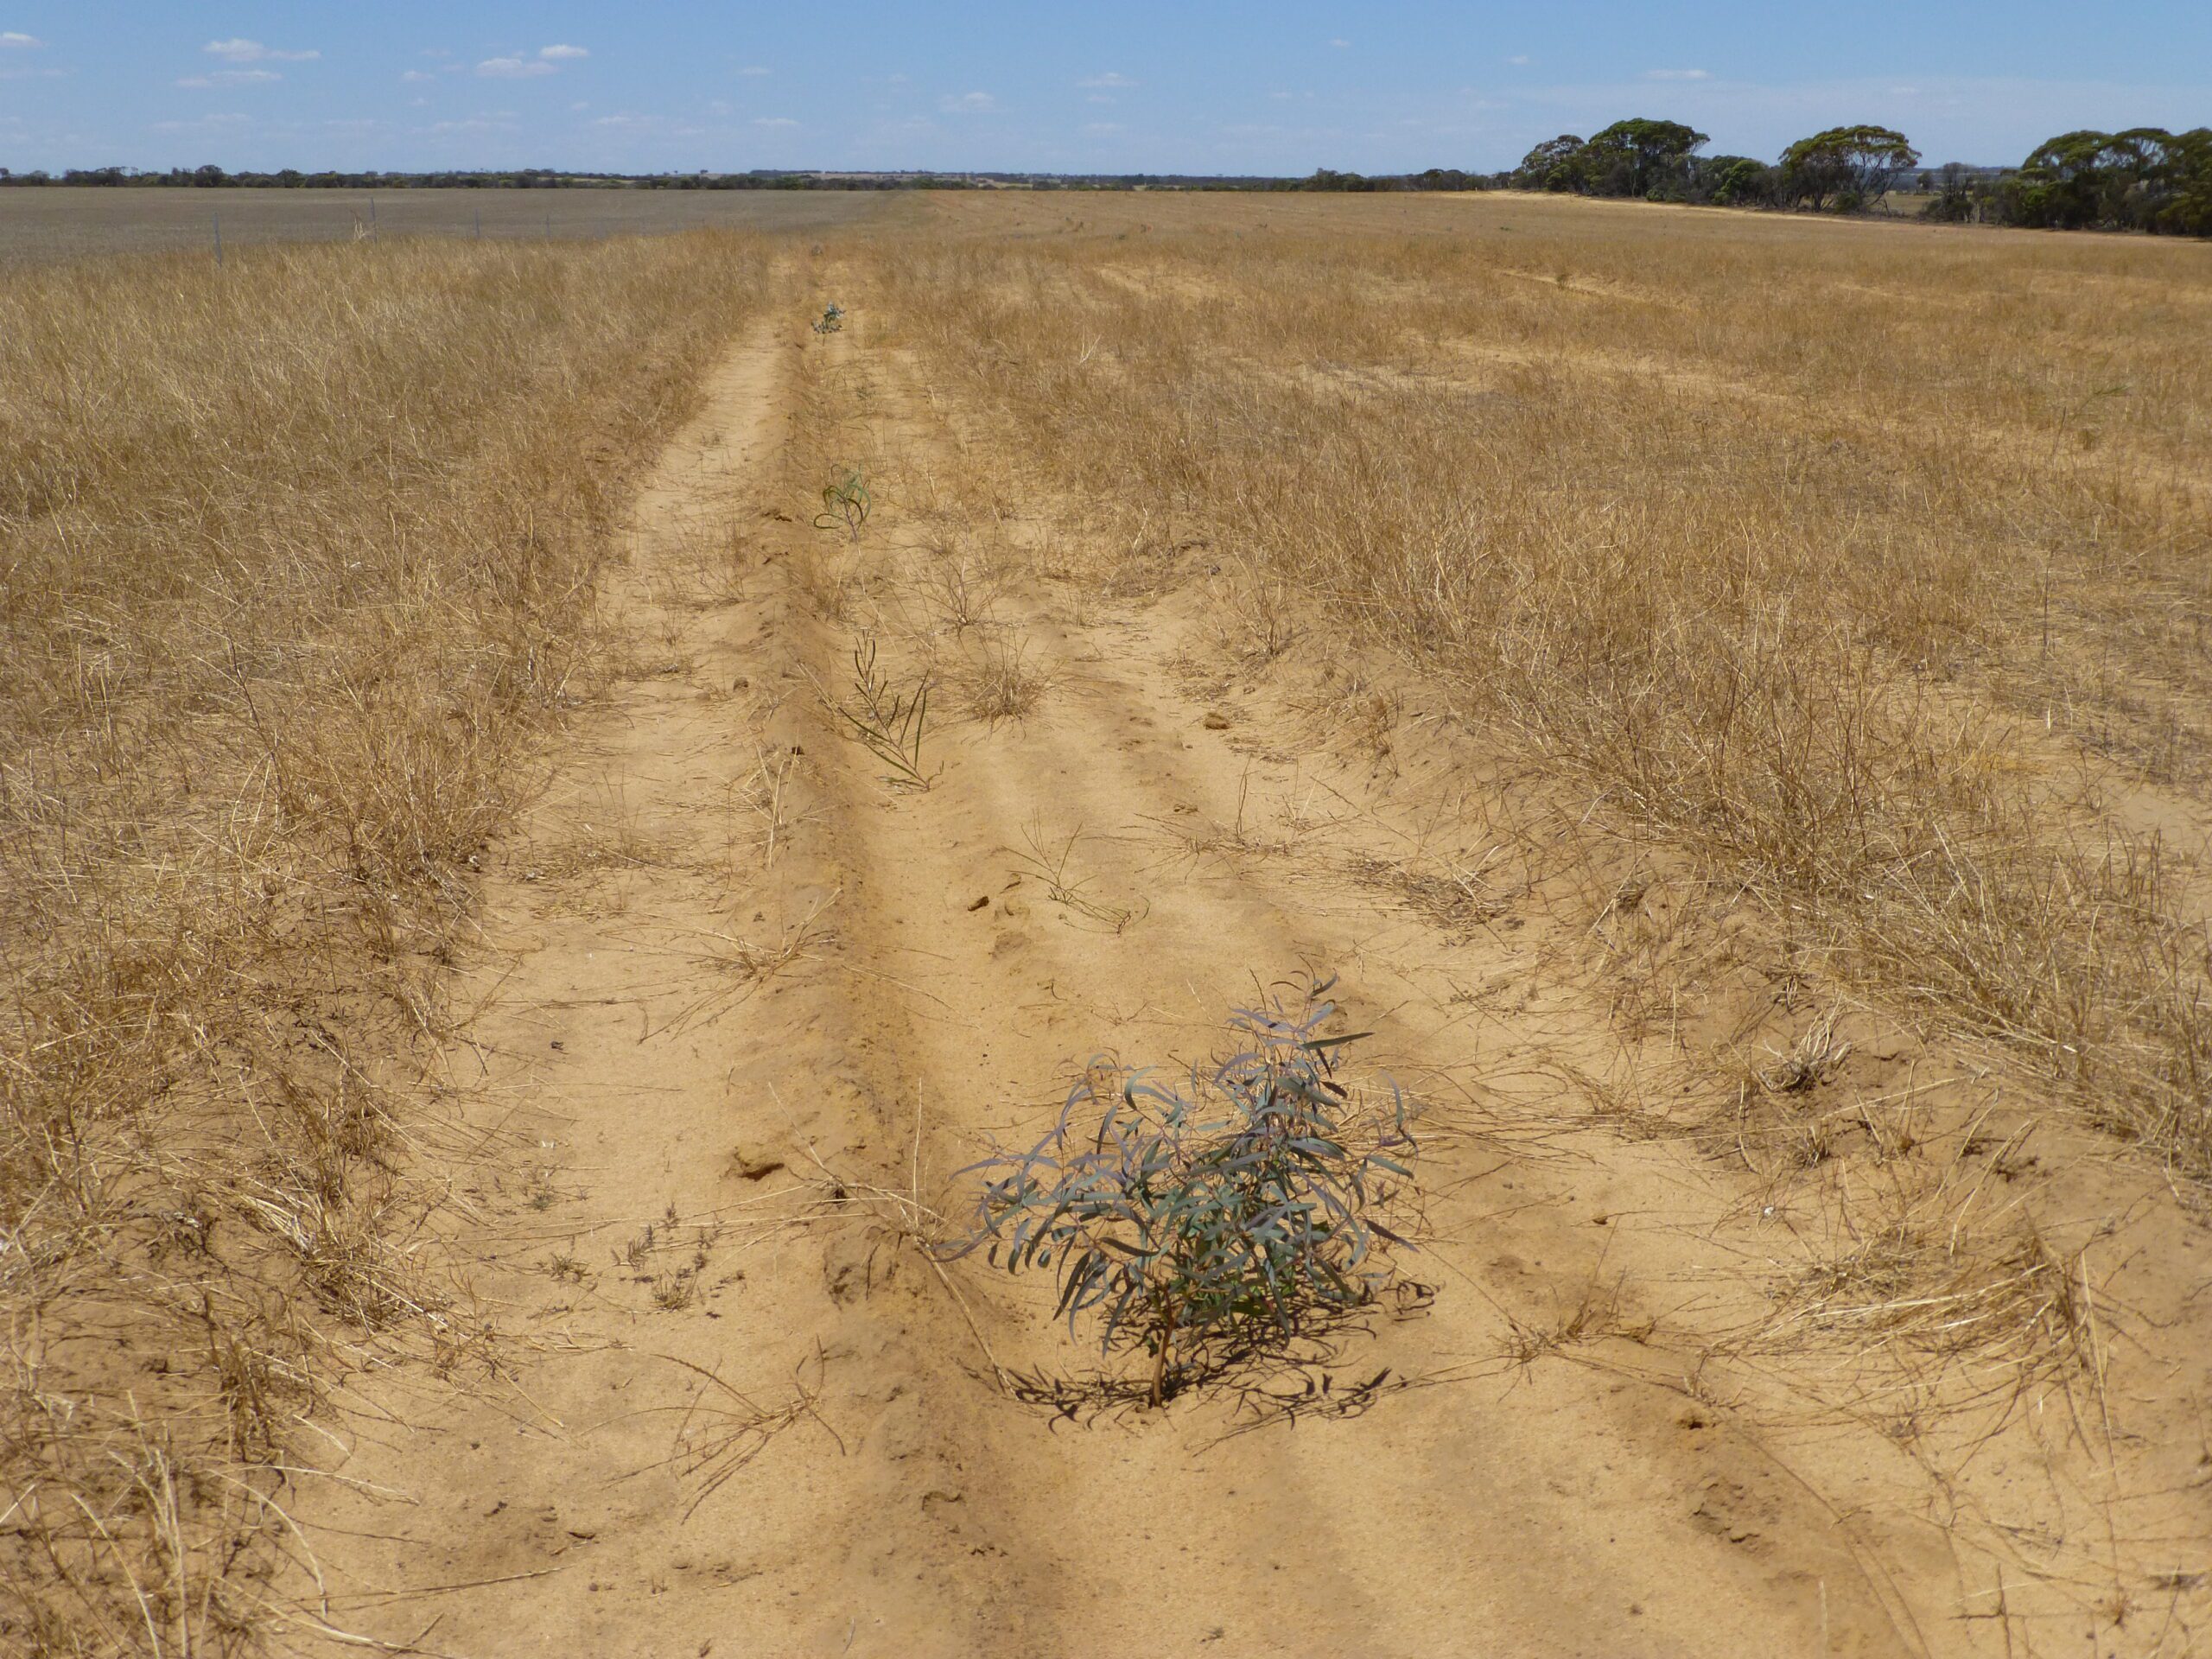 Photo of a dried paddock with a row of small planted seedlings.